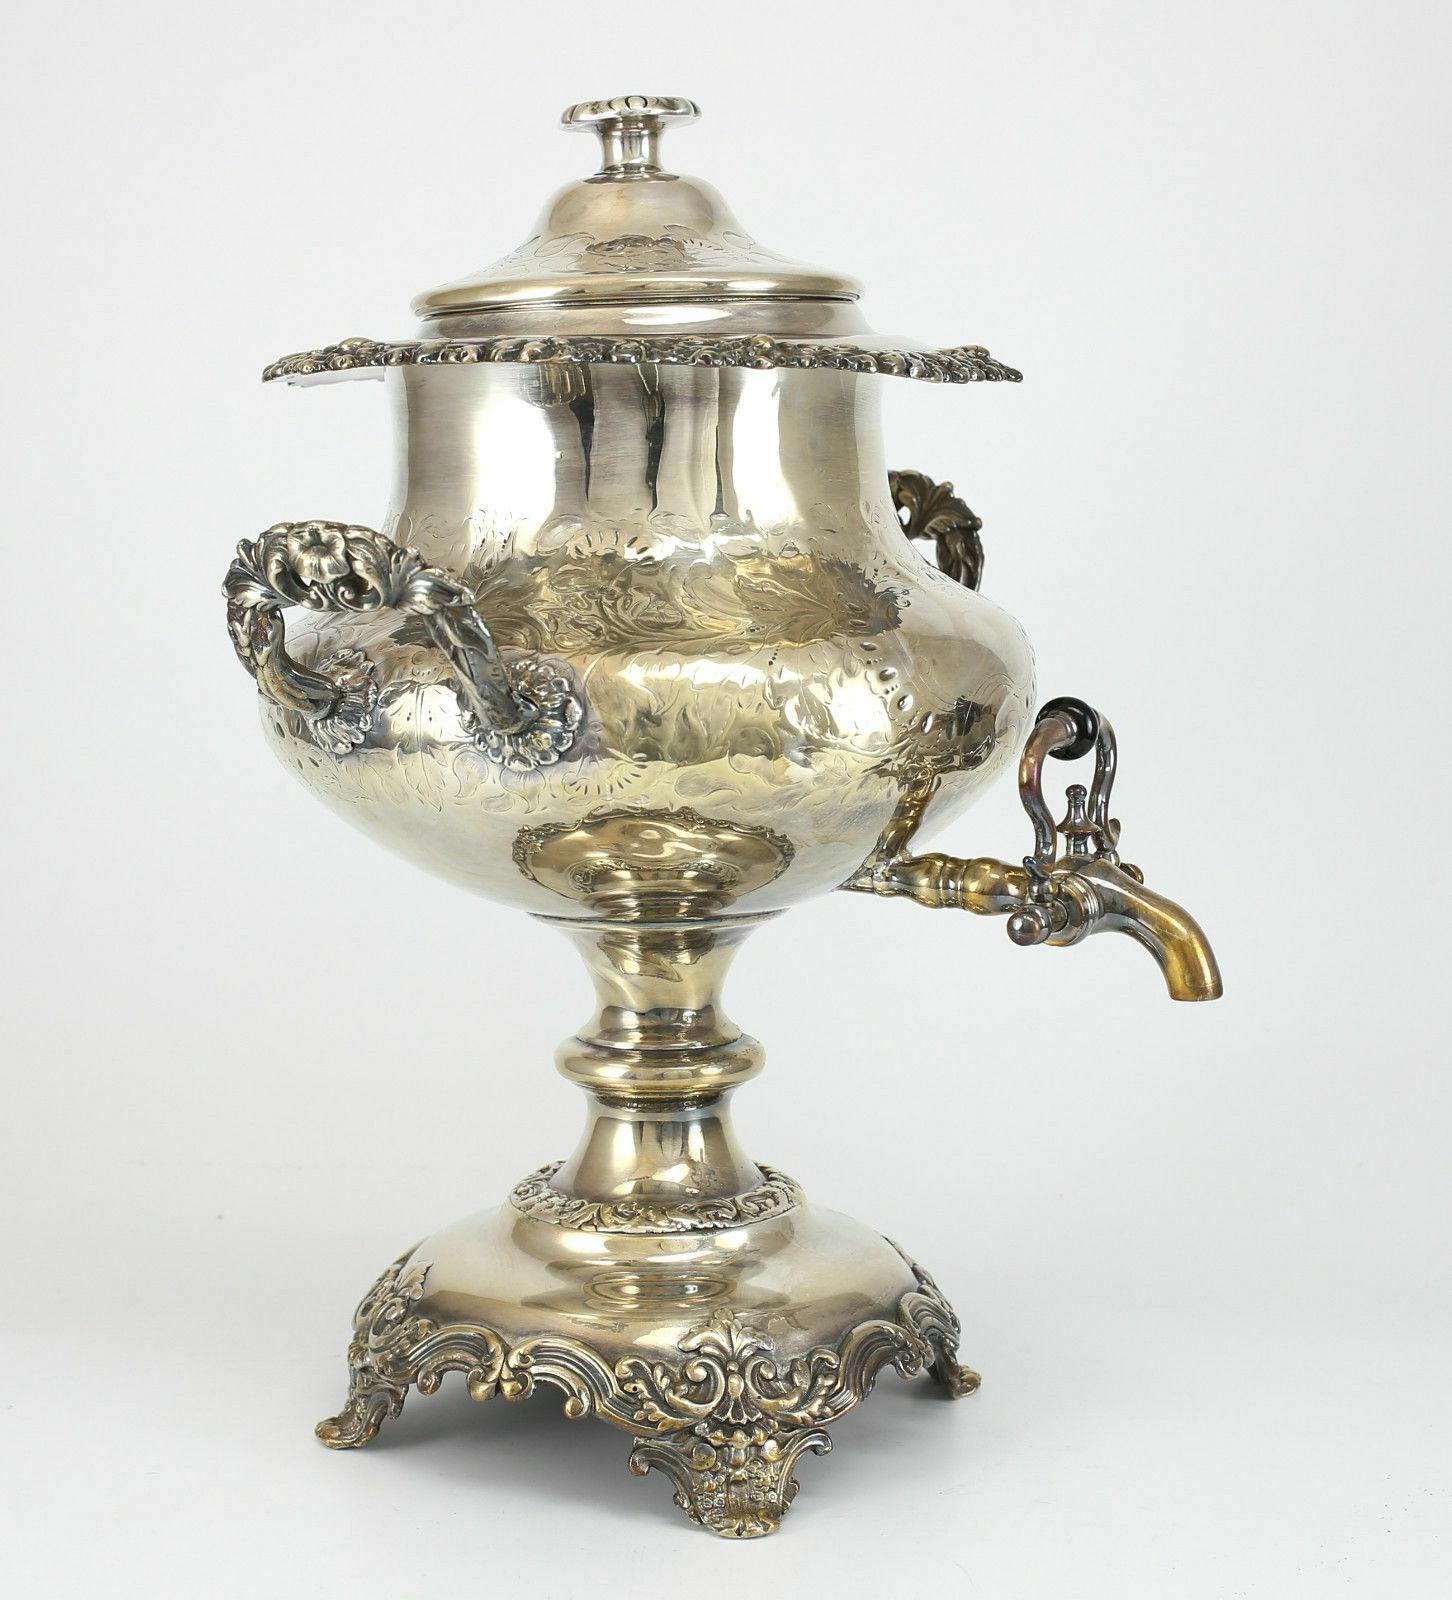 English Silverplate Hot Water Kettle Hand Chased with Flowers, 19th Century

Hand chased Floral Design with vacant centered shield and applied floral handles on a walkable base. This piece contains Silverplate on copper indicative of its age.